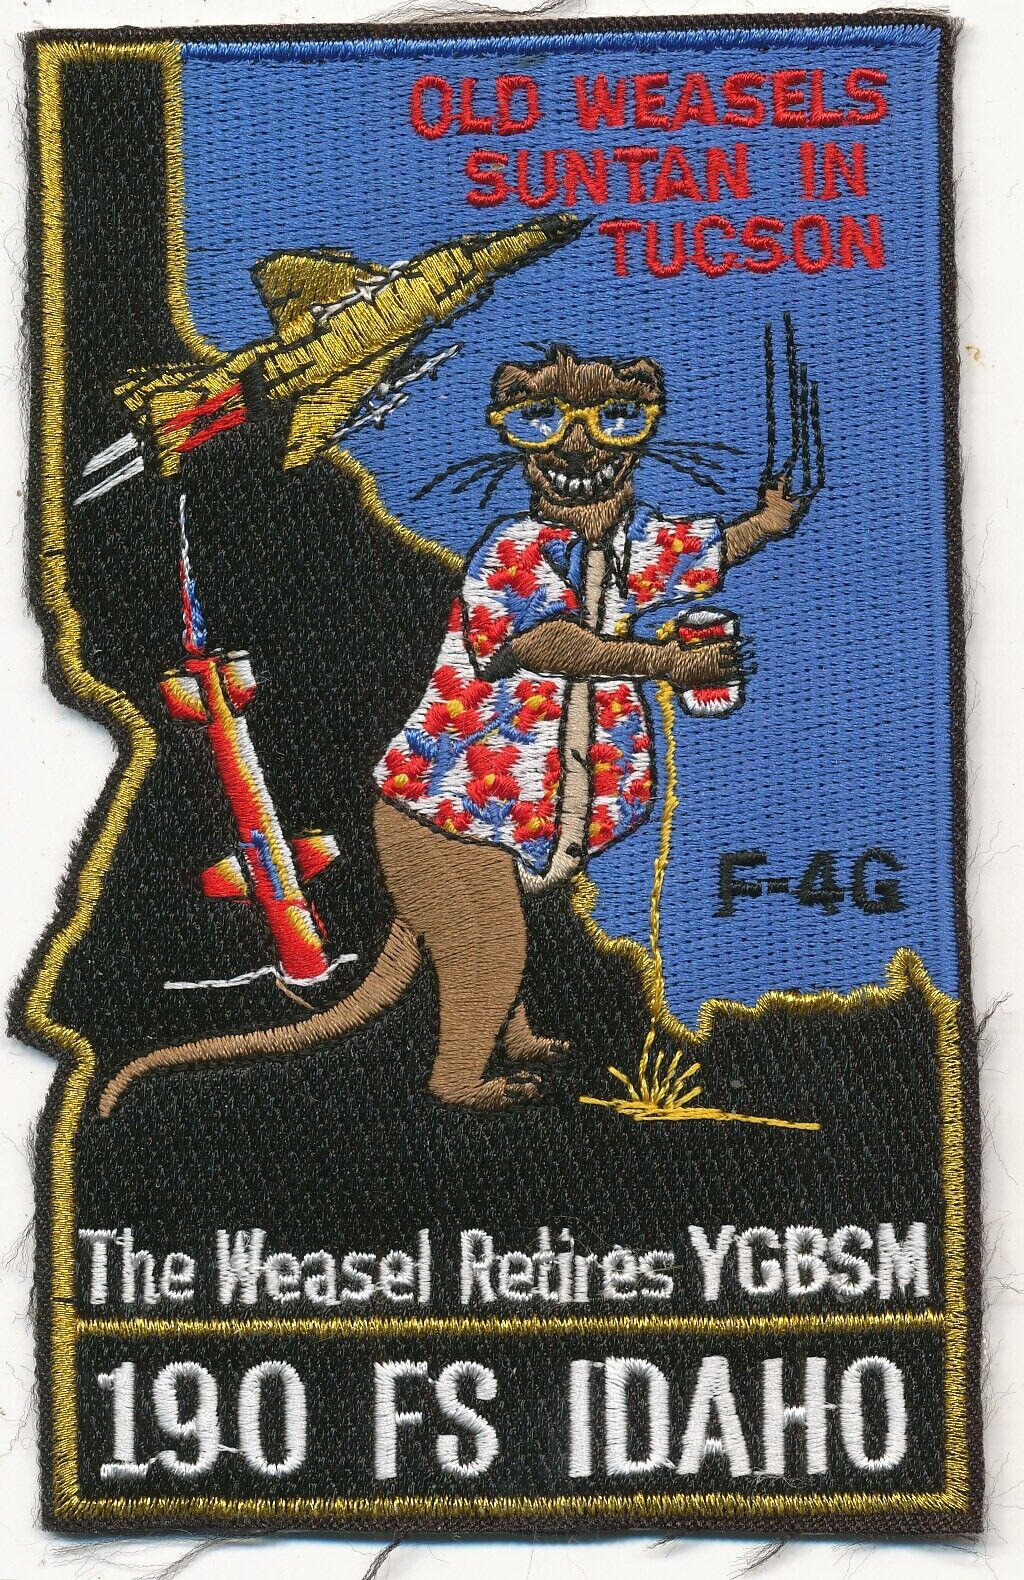 The Wild Weasel Retires YGBSM F-4G patch 190th Fighter Squadron USAF US Air Forc